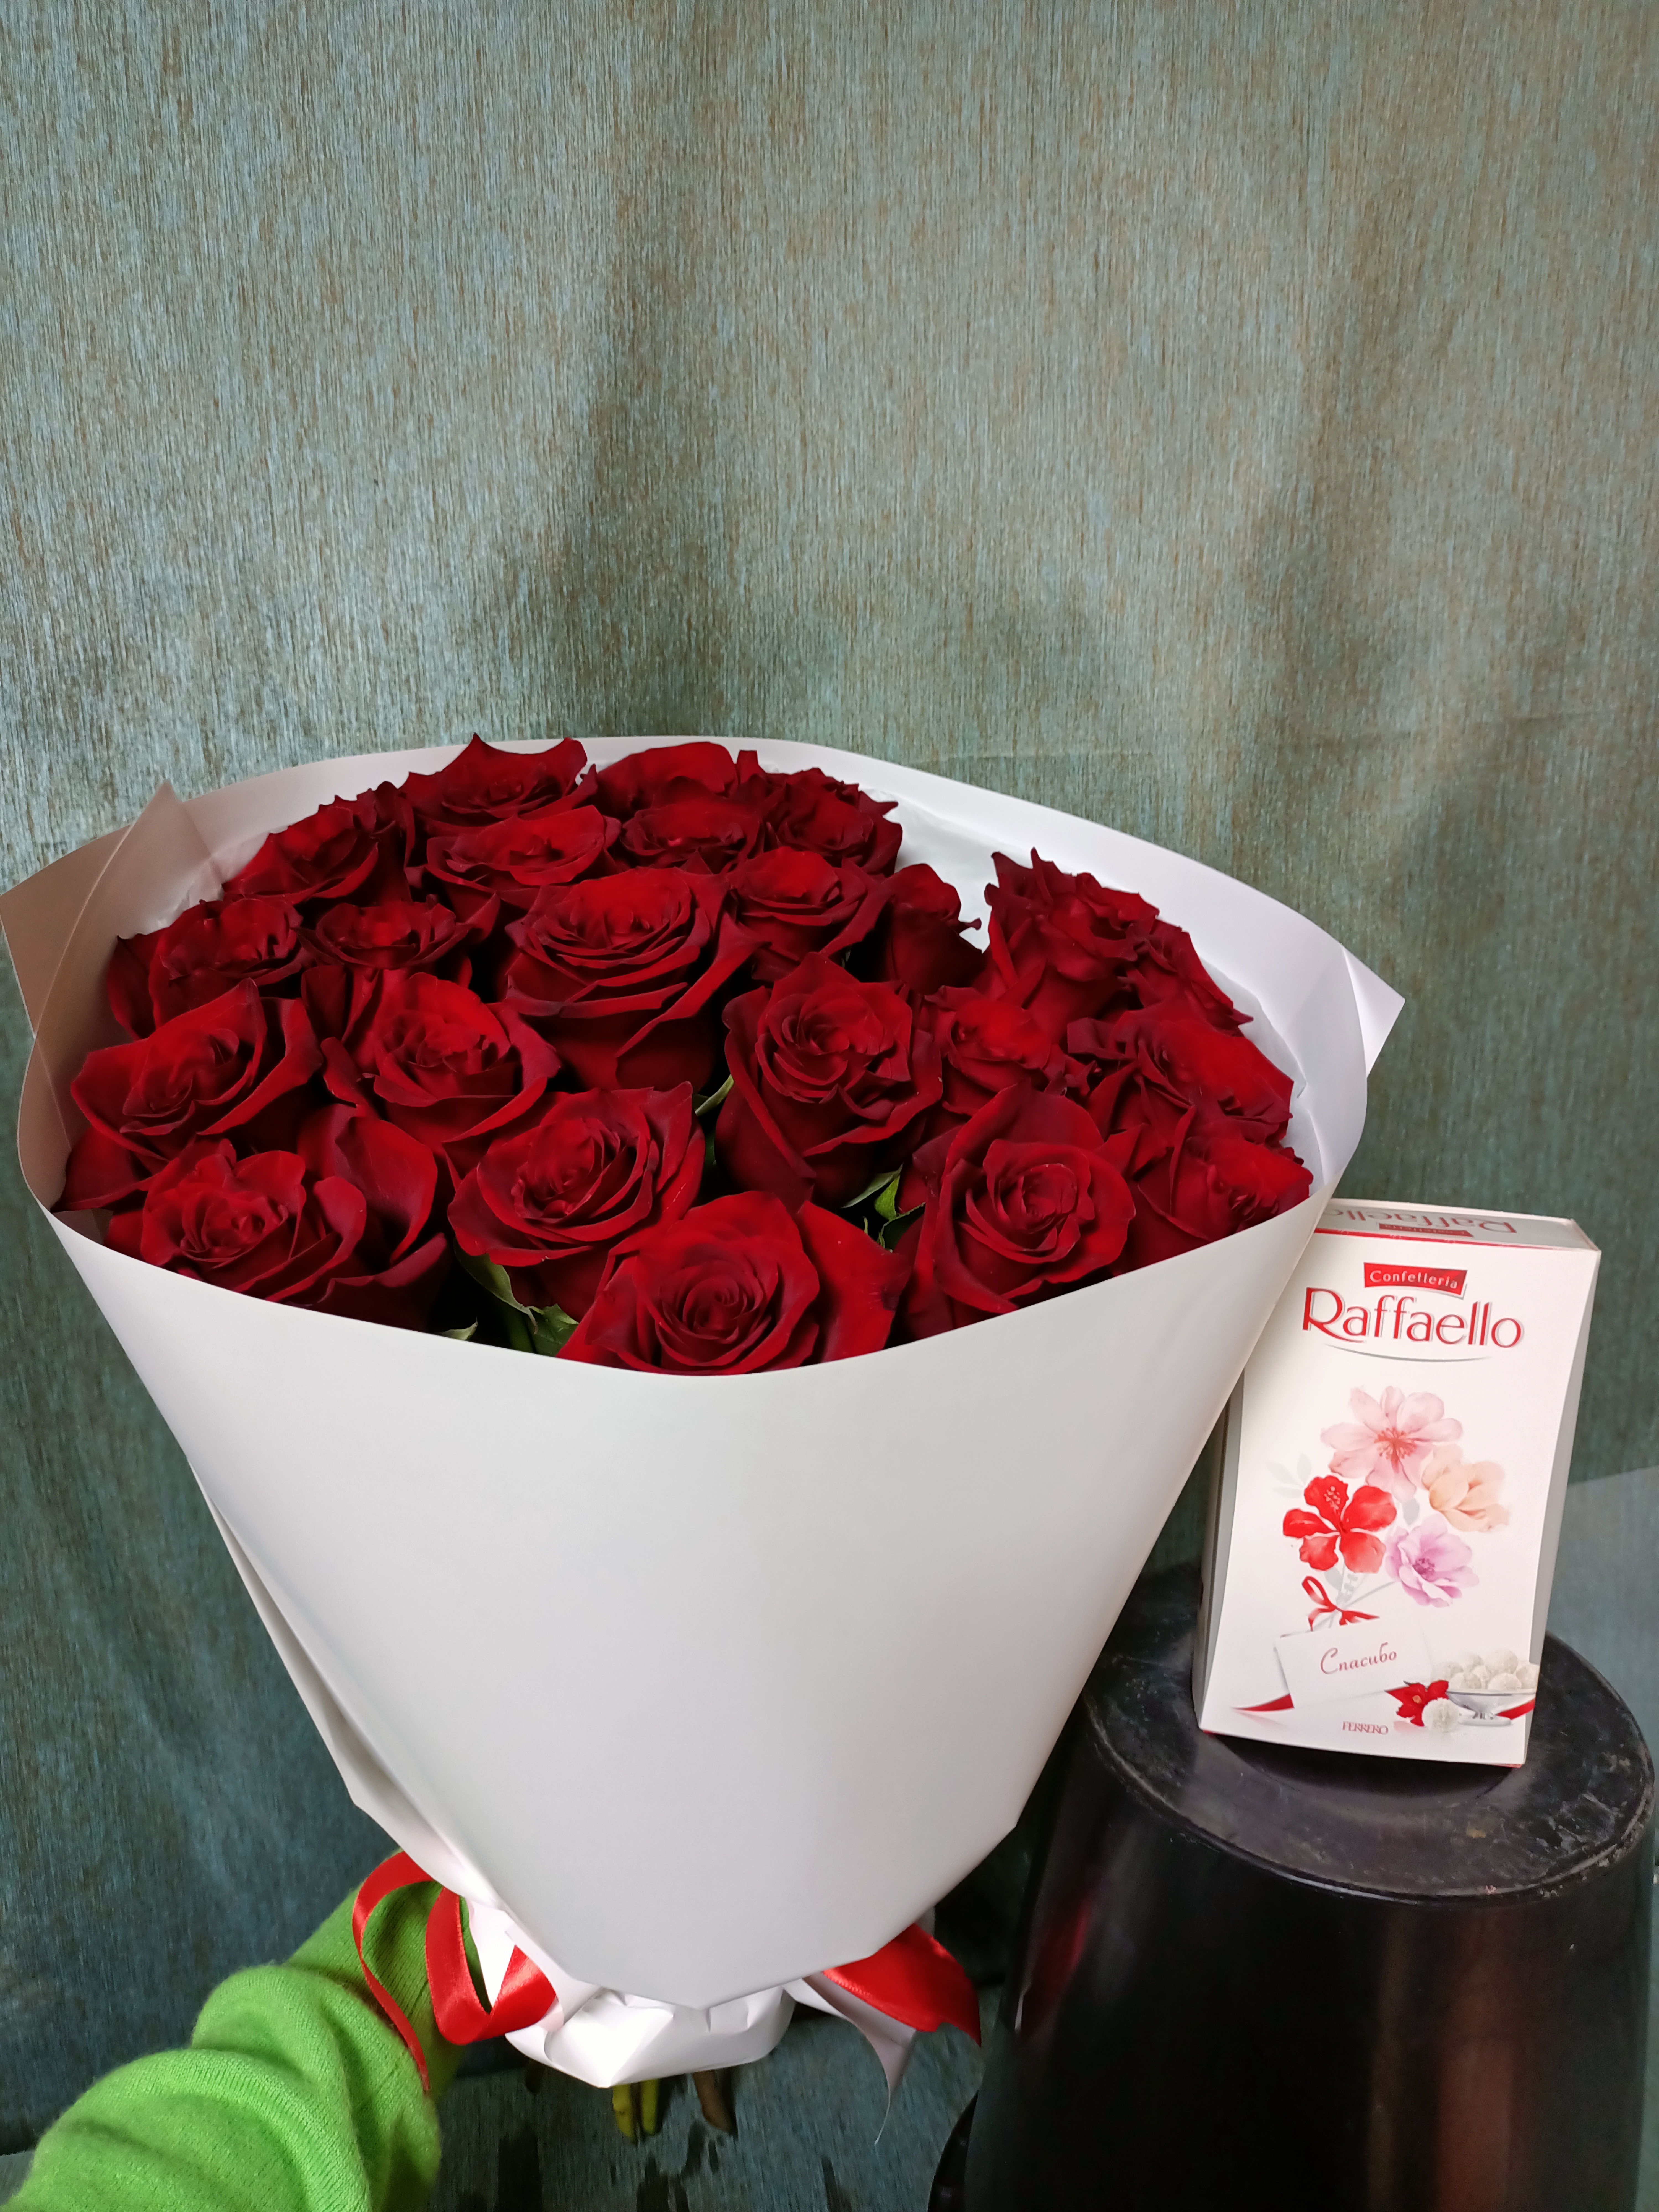 Bouquet of Bouquet of flowers with a box Raffaello flowers delivered to Kostanay.